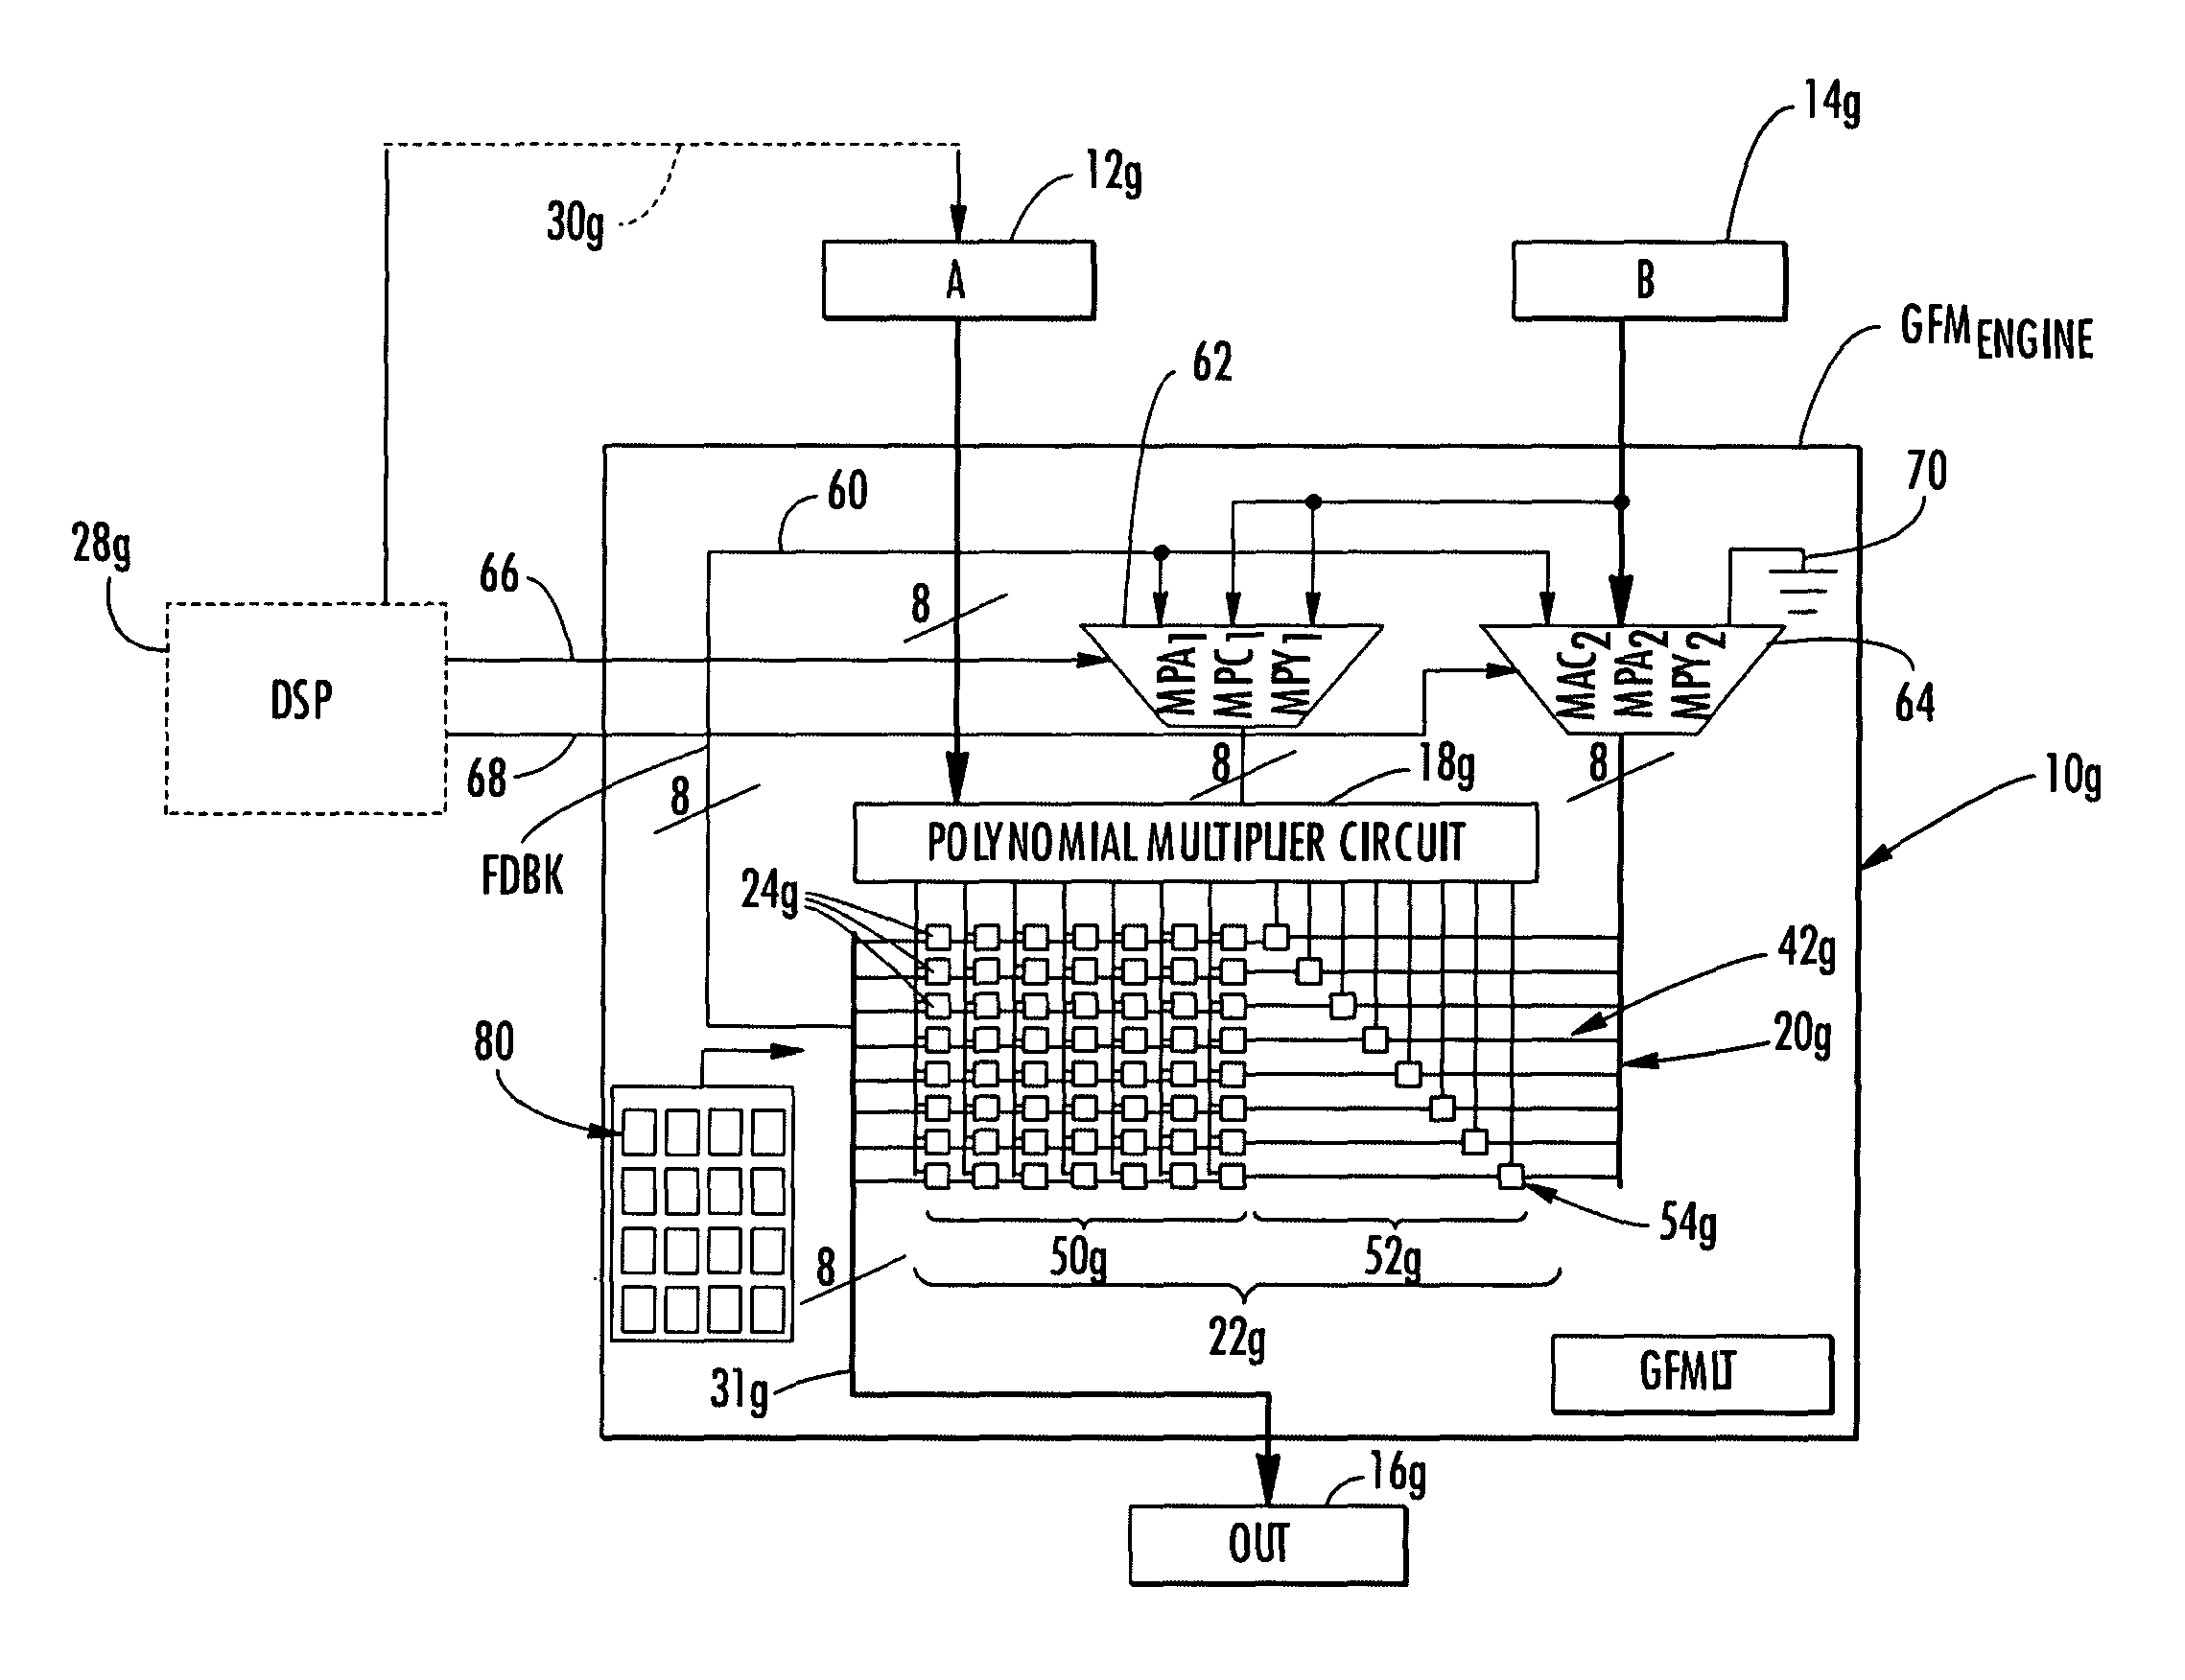 Compact Galois field multiplier engine